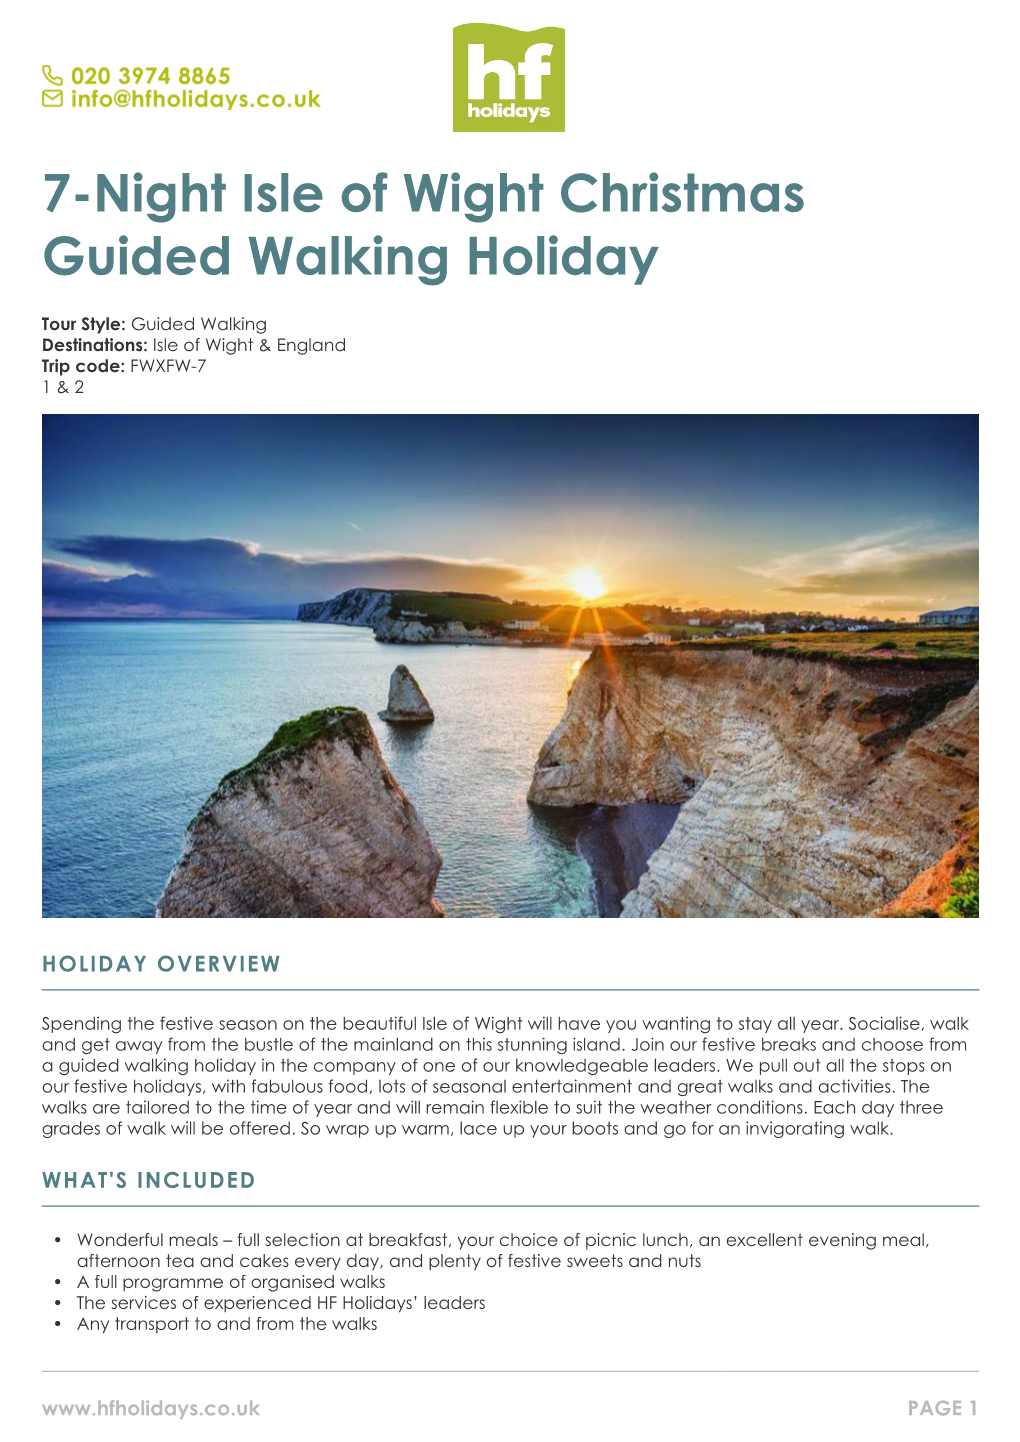 7-Night Isle of Wight Christmas Guided Walking Holiday